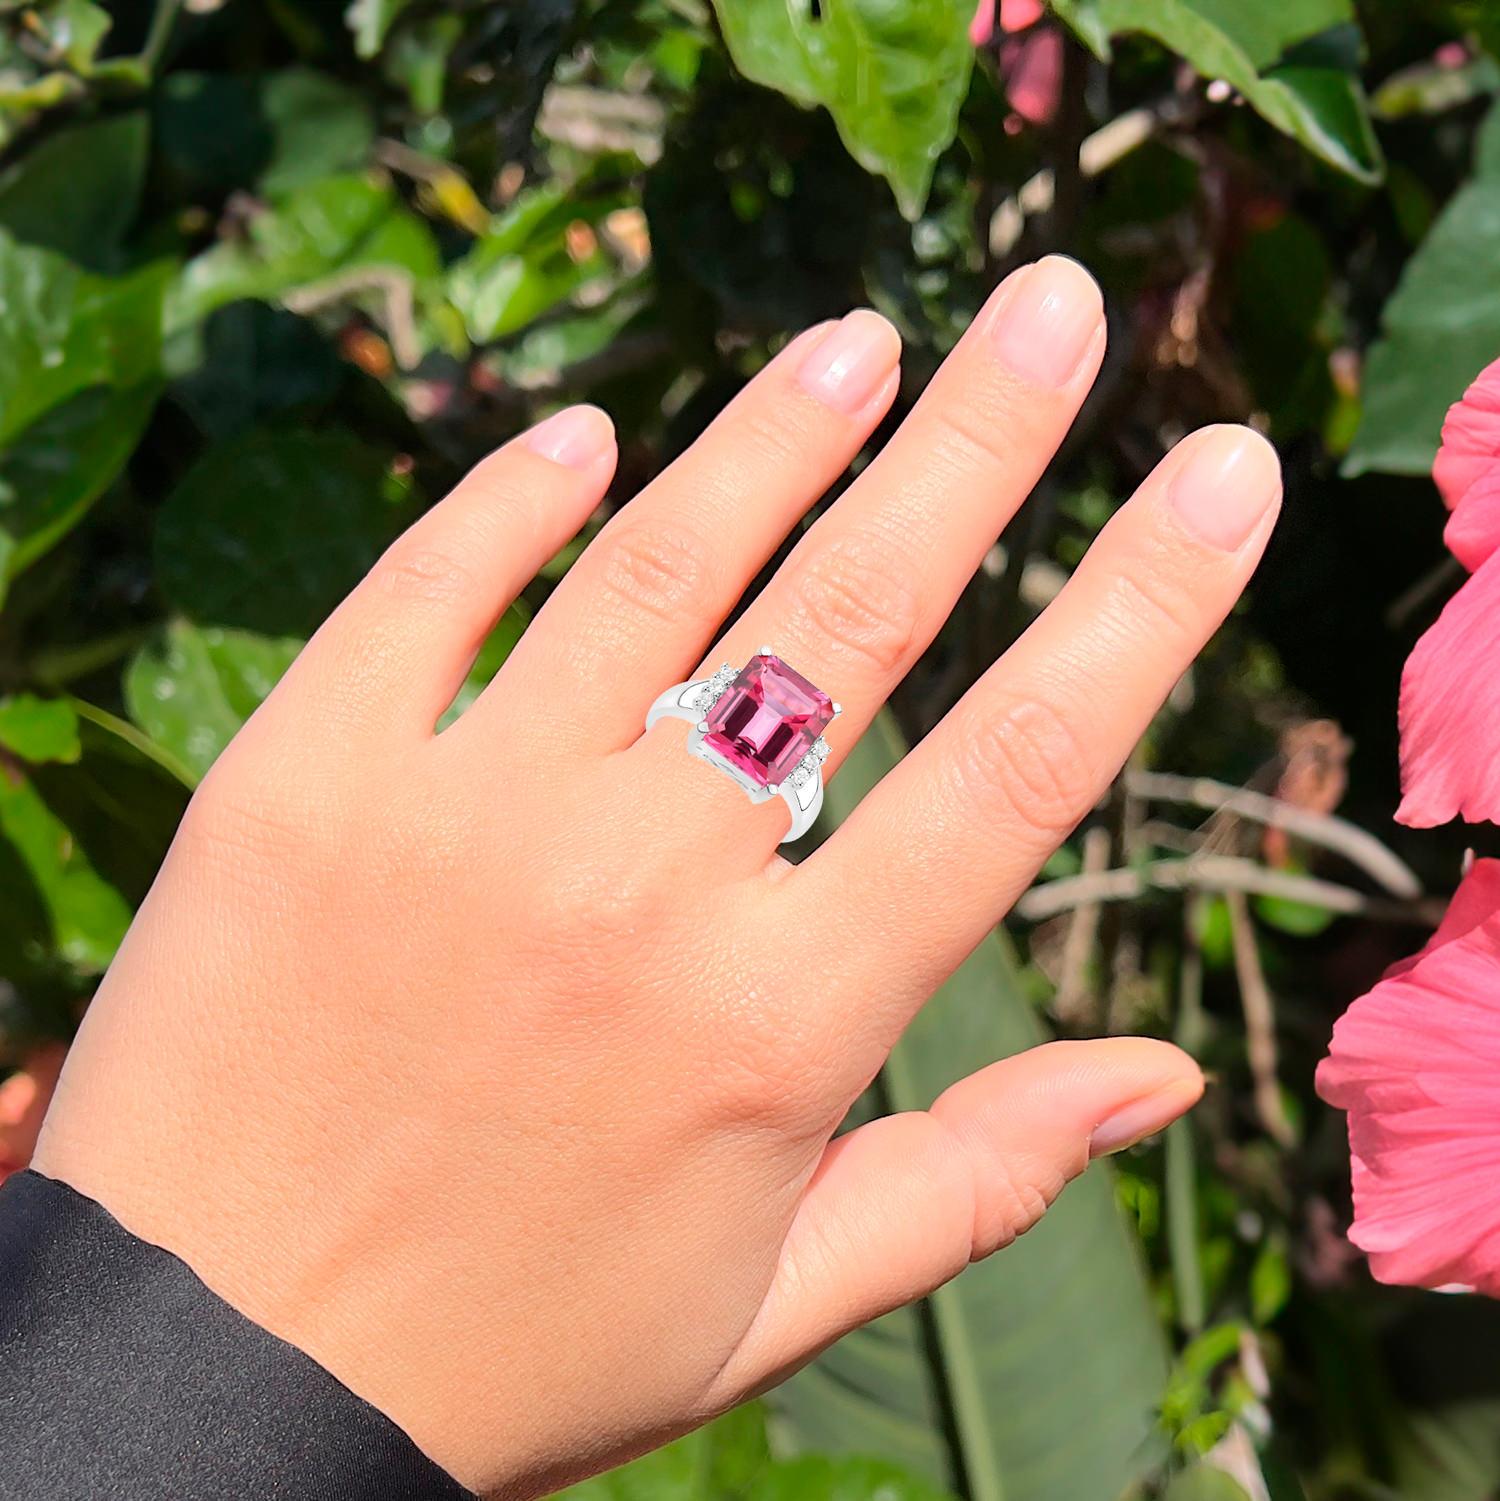 Emerald Cut Pink Topaz Cocktail Ring White Topaz Setting 7.38 Carats For Sale